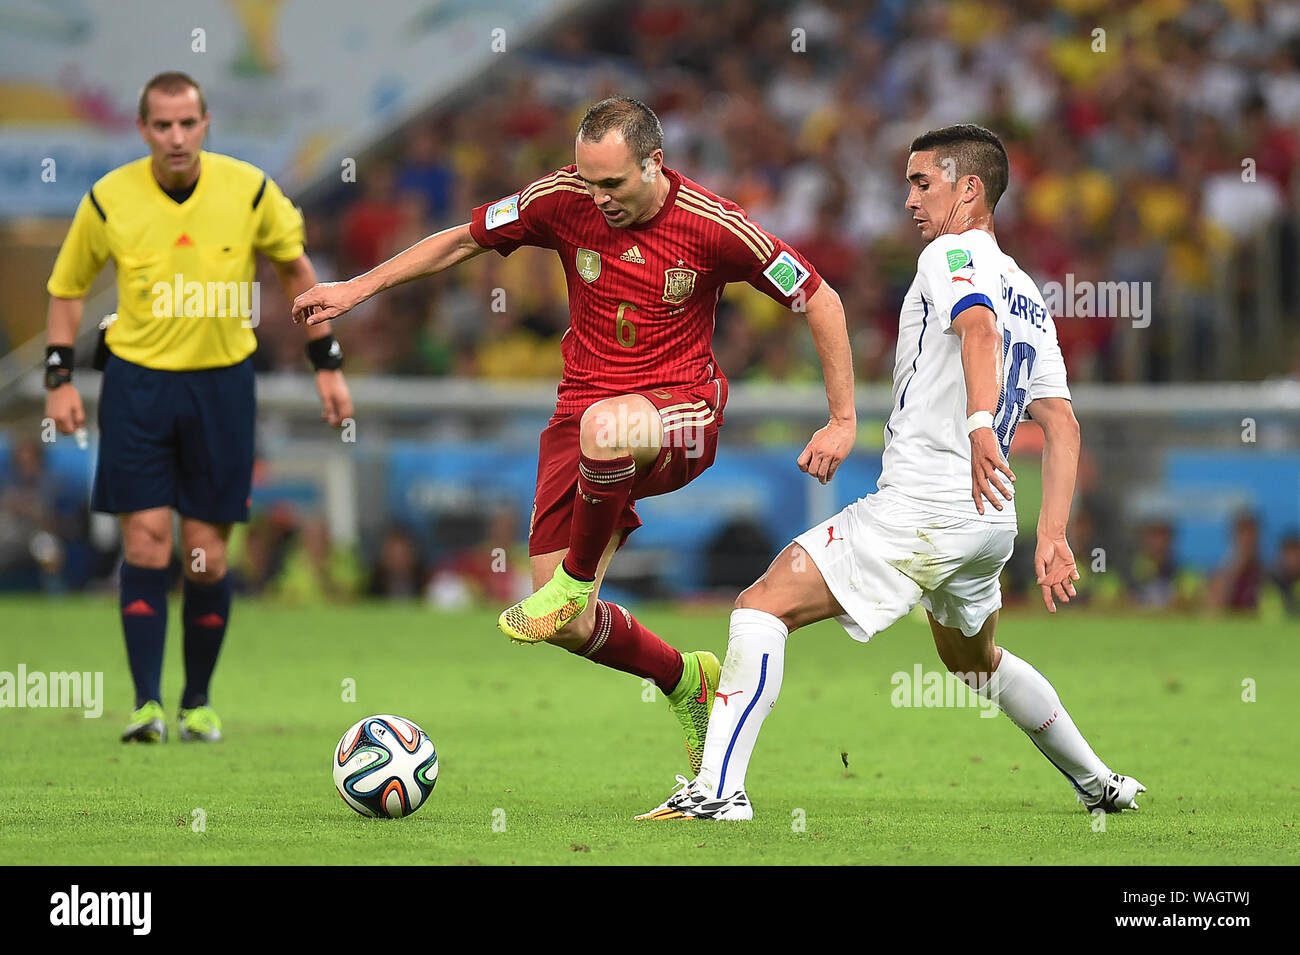 Rio de Janeiro, June 18, 2014. Spain Iniesta soccer player, during match Spain vs Chile, of the 2014 World Cup in the Maracanã Stadium in Rio de Janei Stock Photo